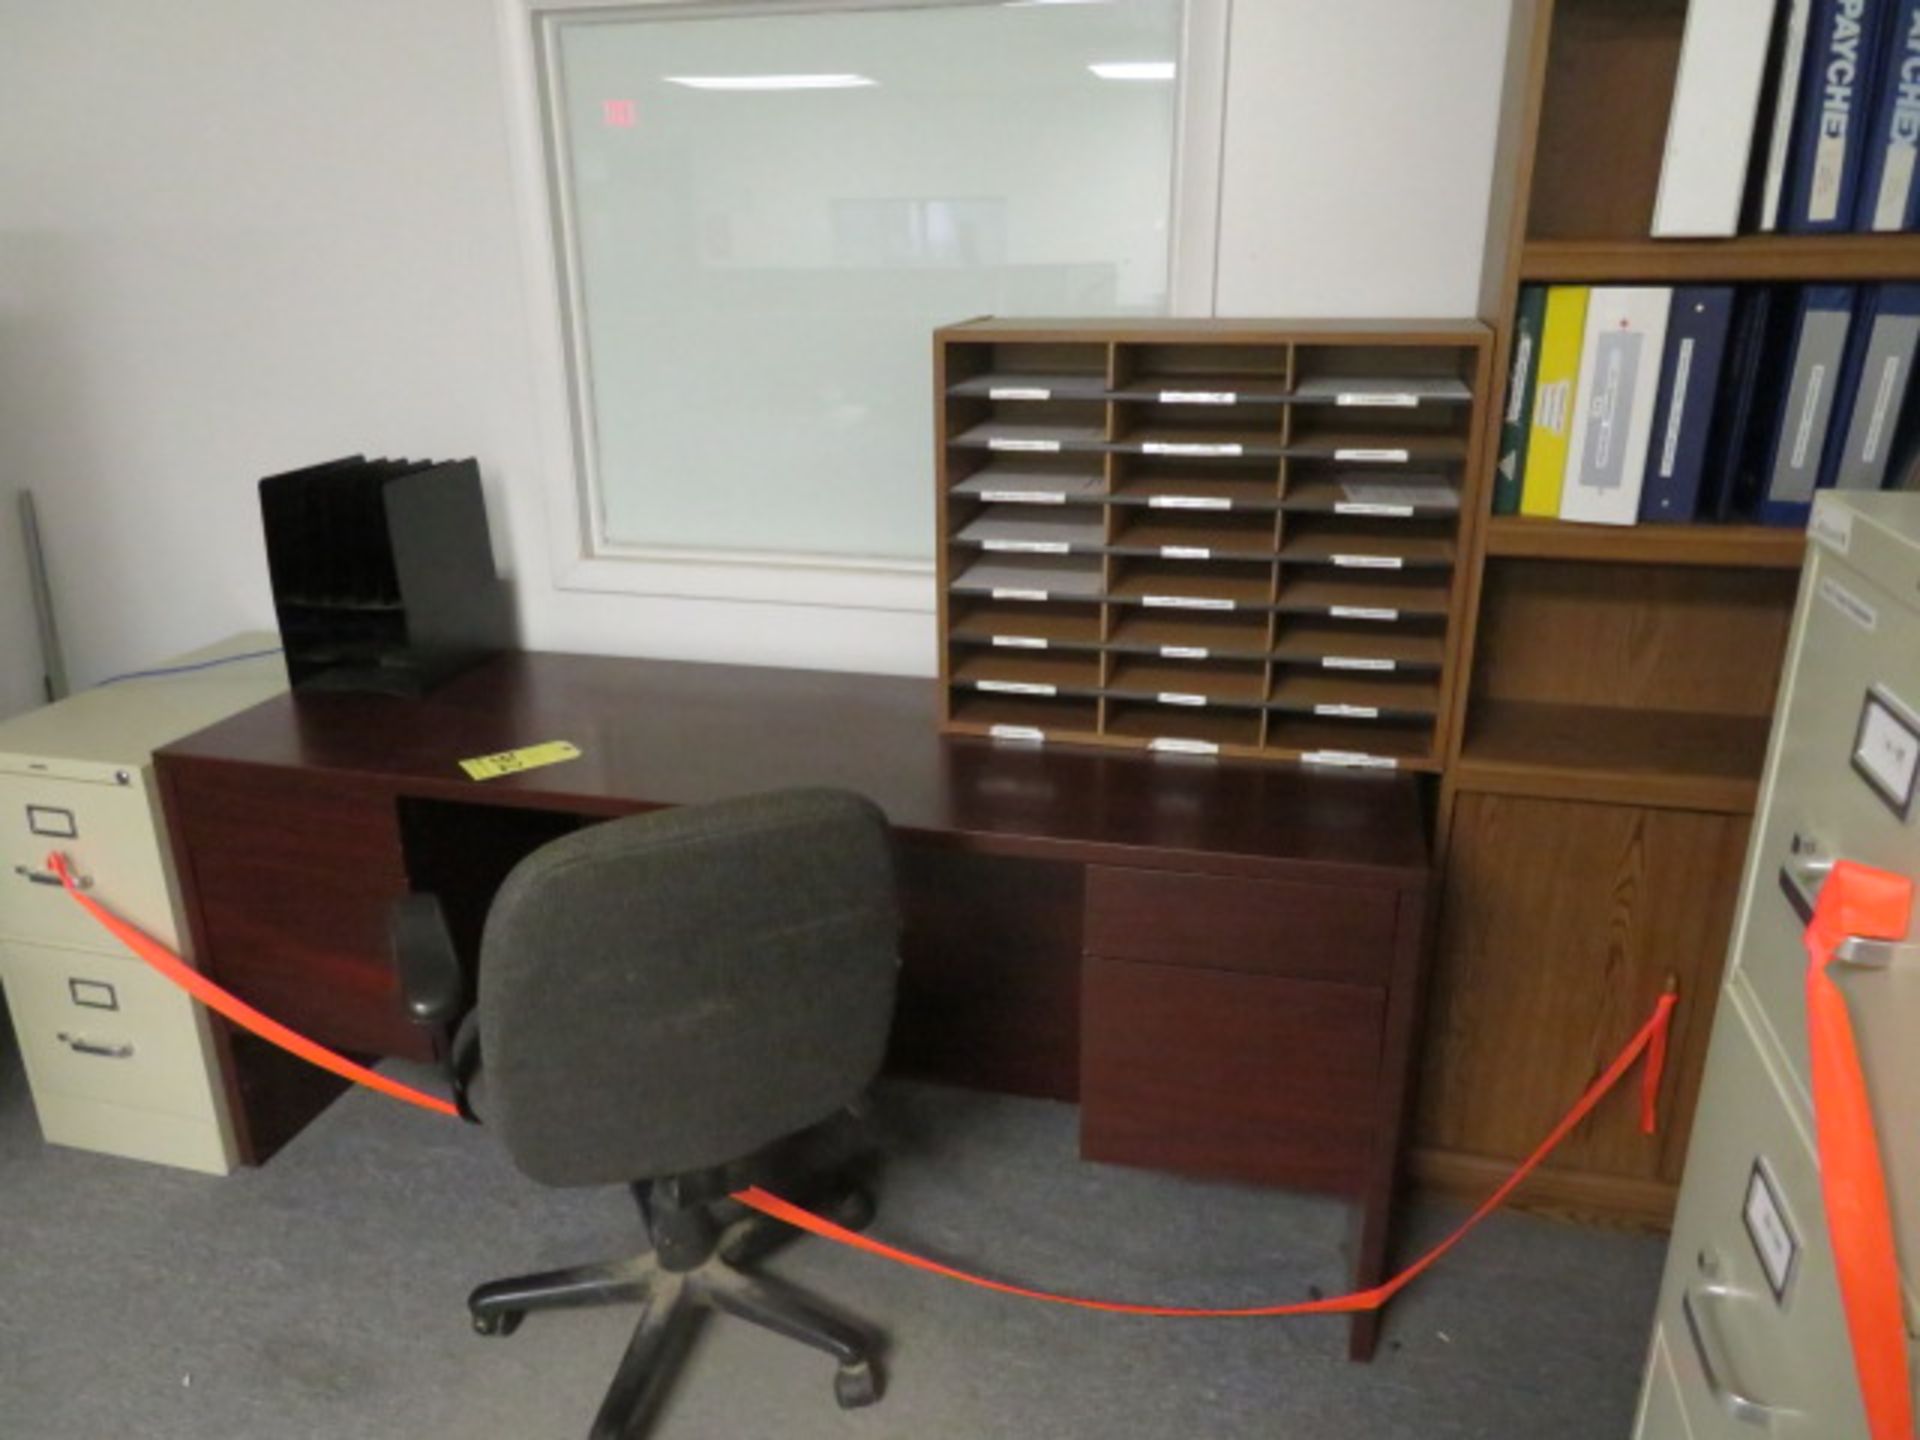 LOT CONSISTING OF OFFICE FURNITURE: 4-drawer desk, chair, 2-drawer file cabinet, multiple file - Image 2 of 3